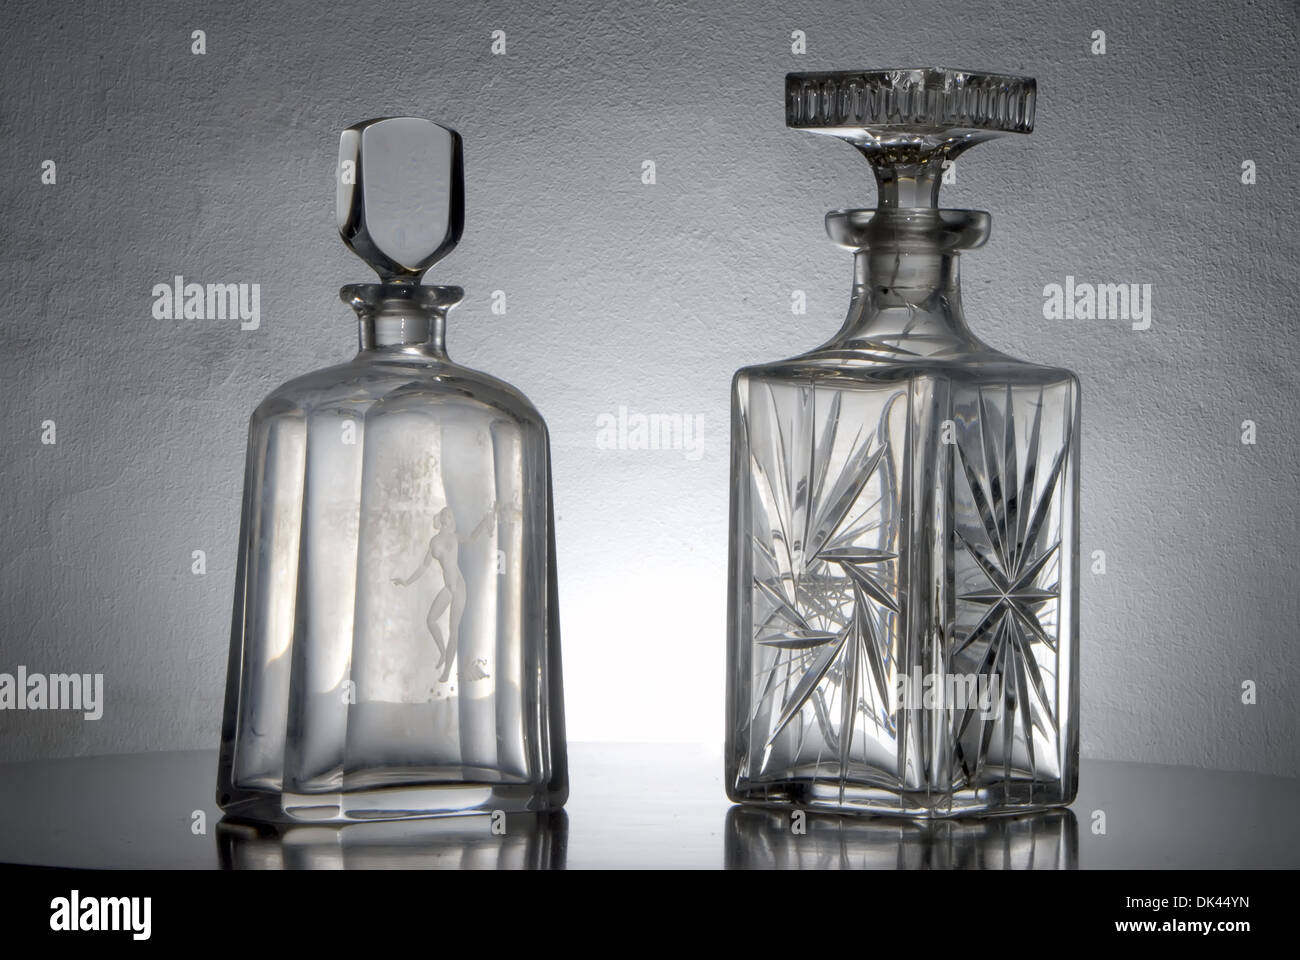 Antique bottles with engravings Stock Photo